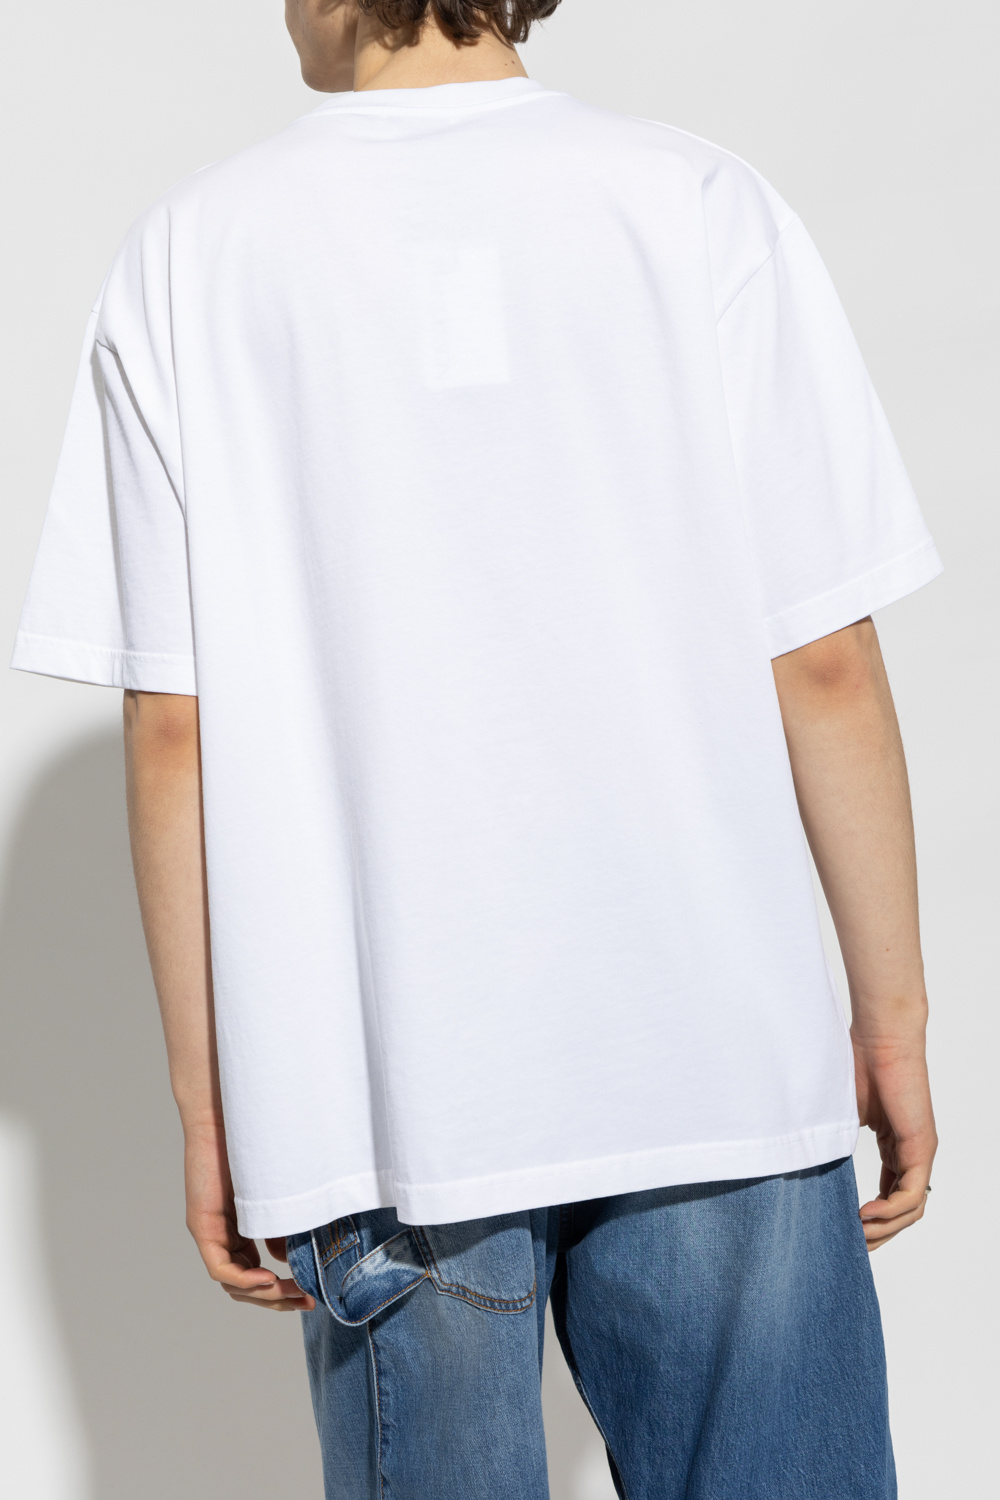 JW Anderson Oversize T-shirt